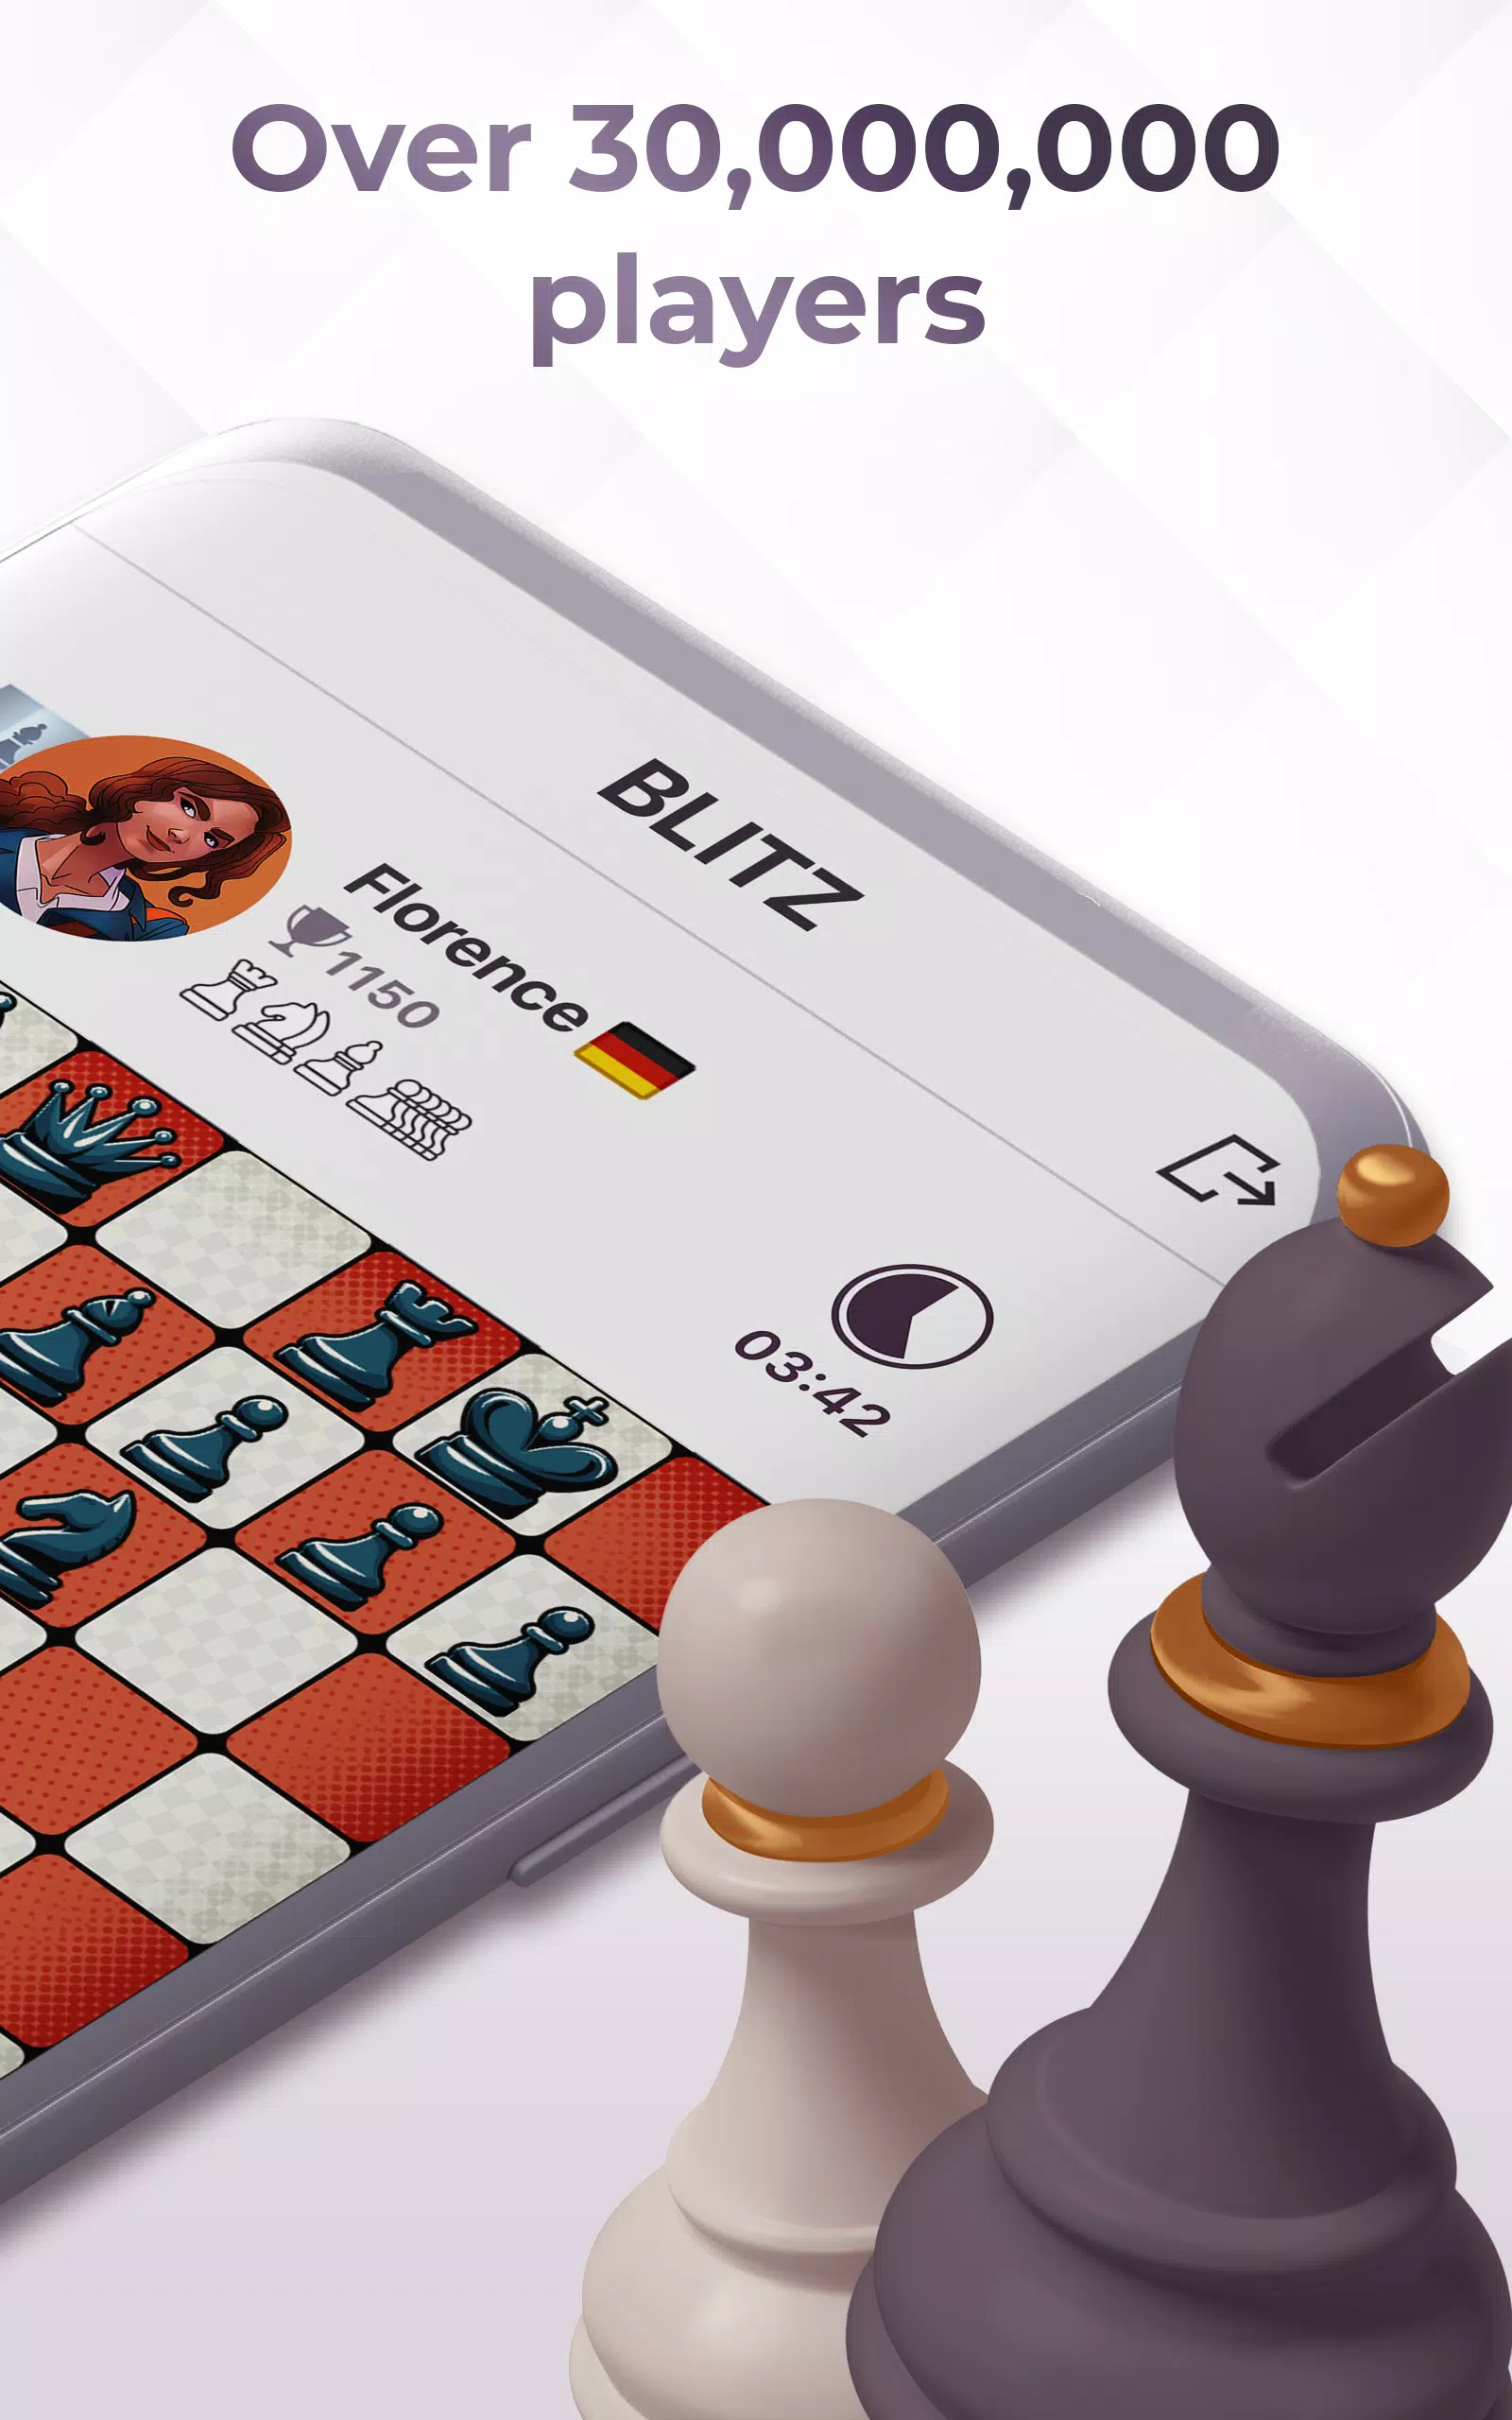 Chess Royale - Play and Learn Game for Android - Download